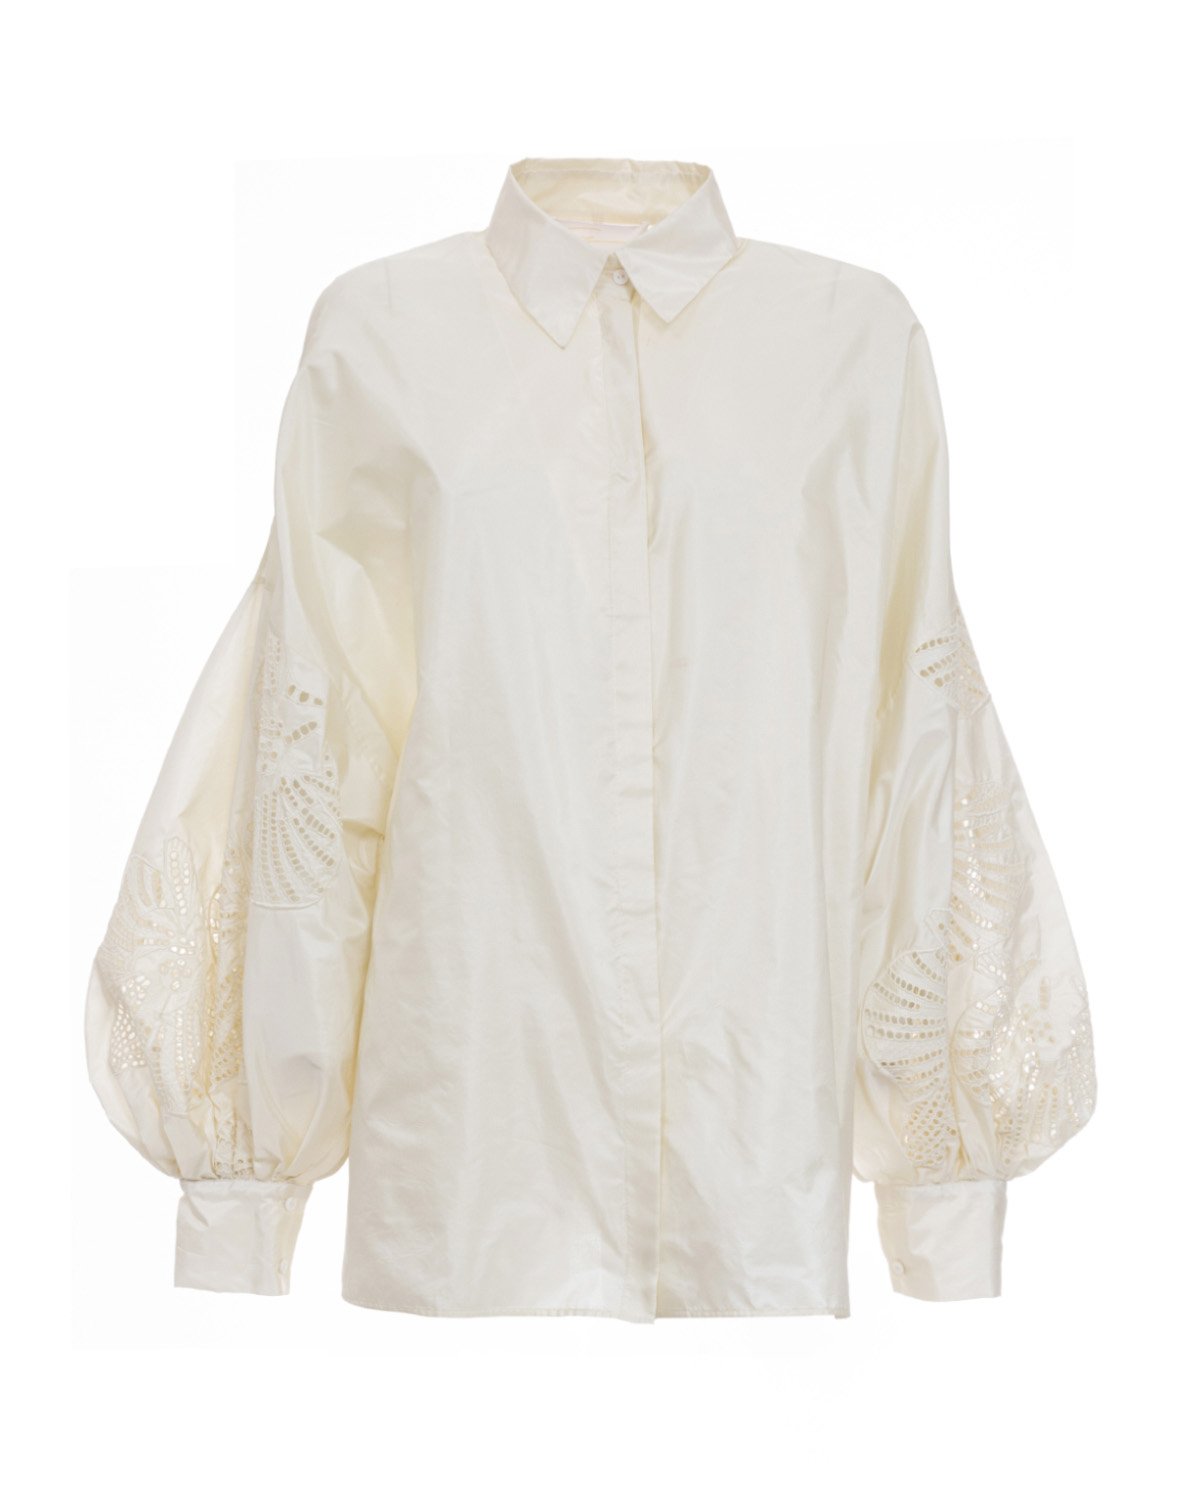 Taffeta blouse with embroidered sleeves. | Temporary Flash Sale | Genny